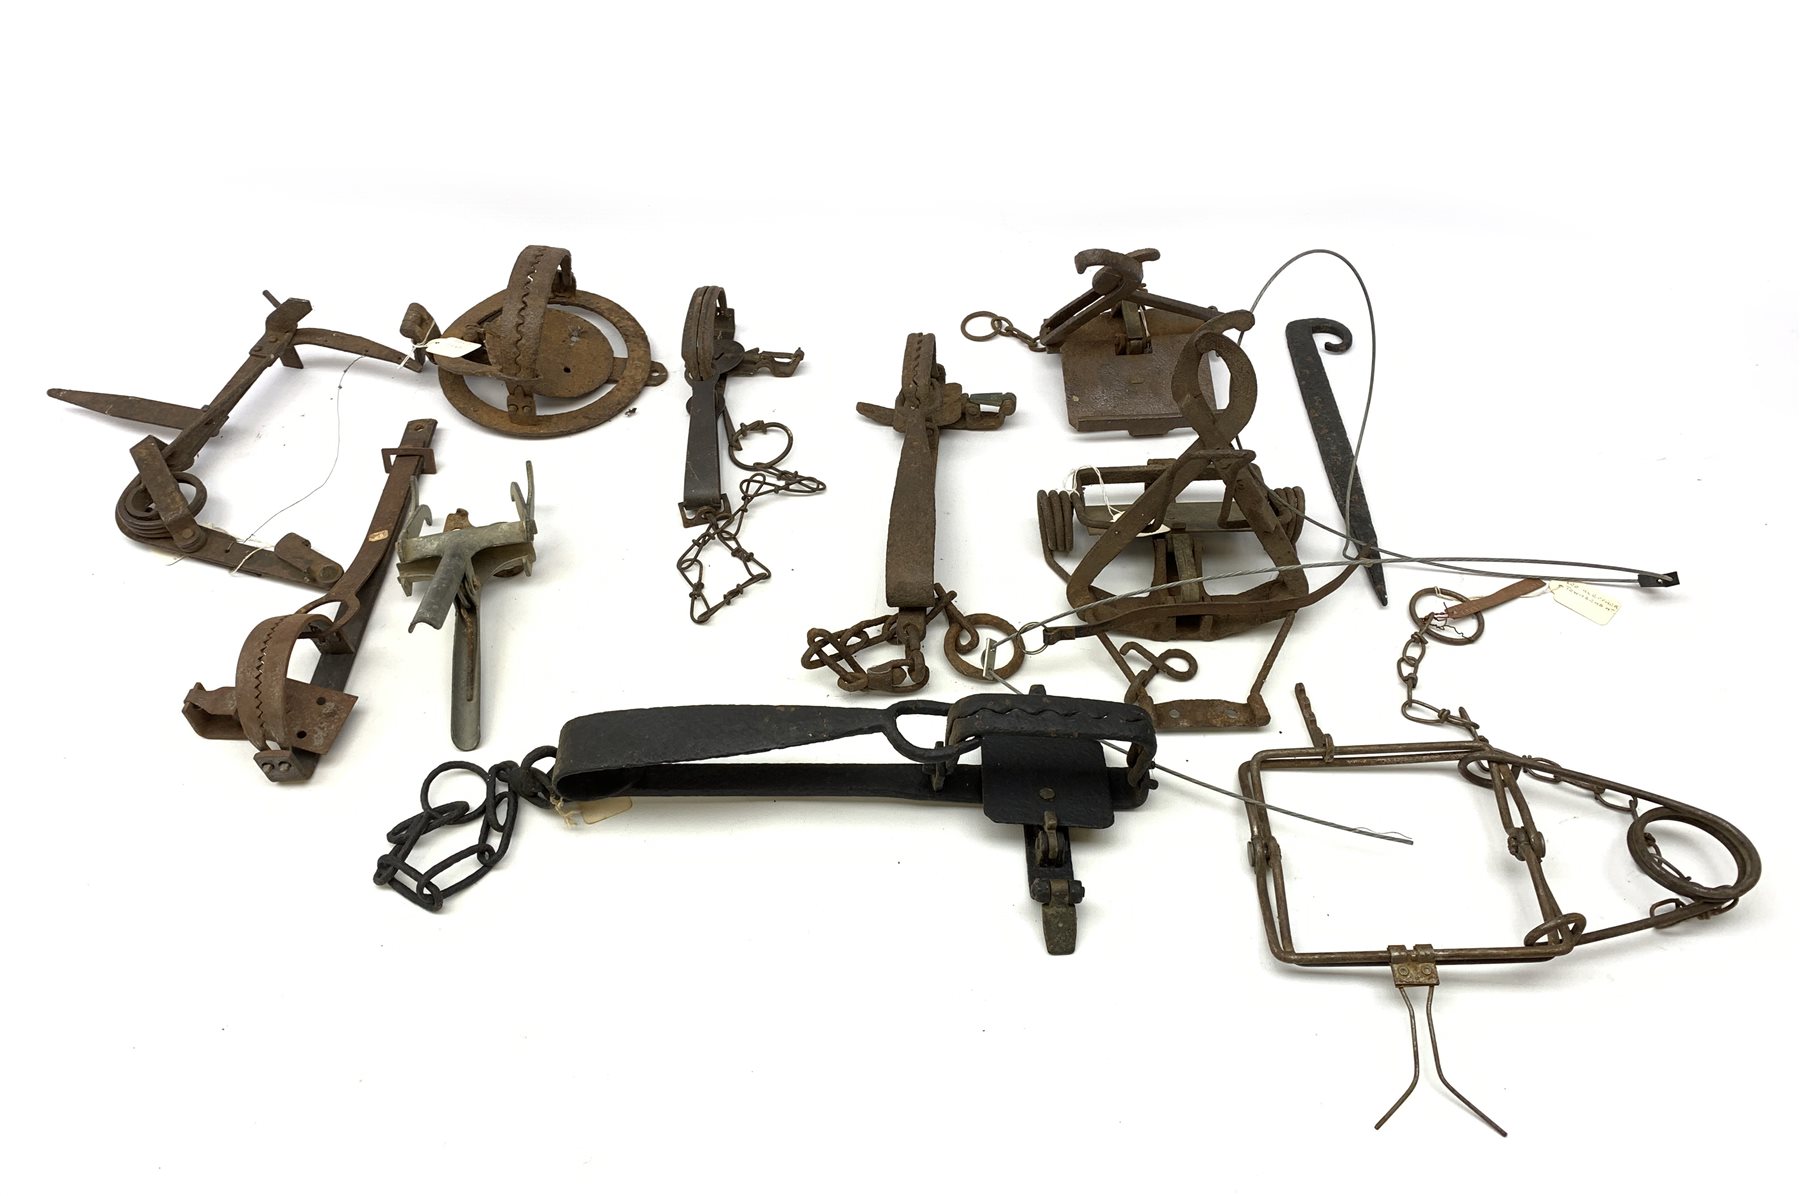 Ten animal traps and snares including Imbra, 'The Juby Trap', H. Lane gin  trap, Pole Trap